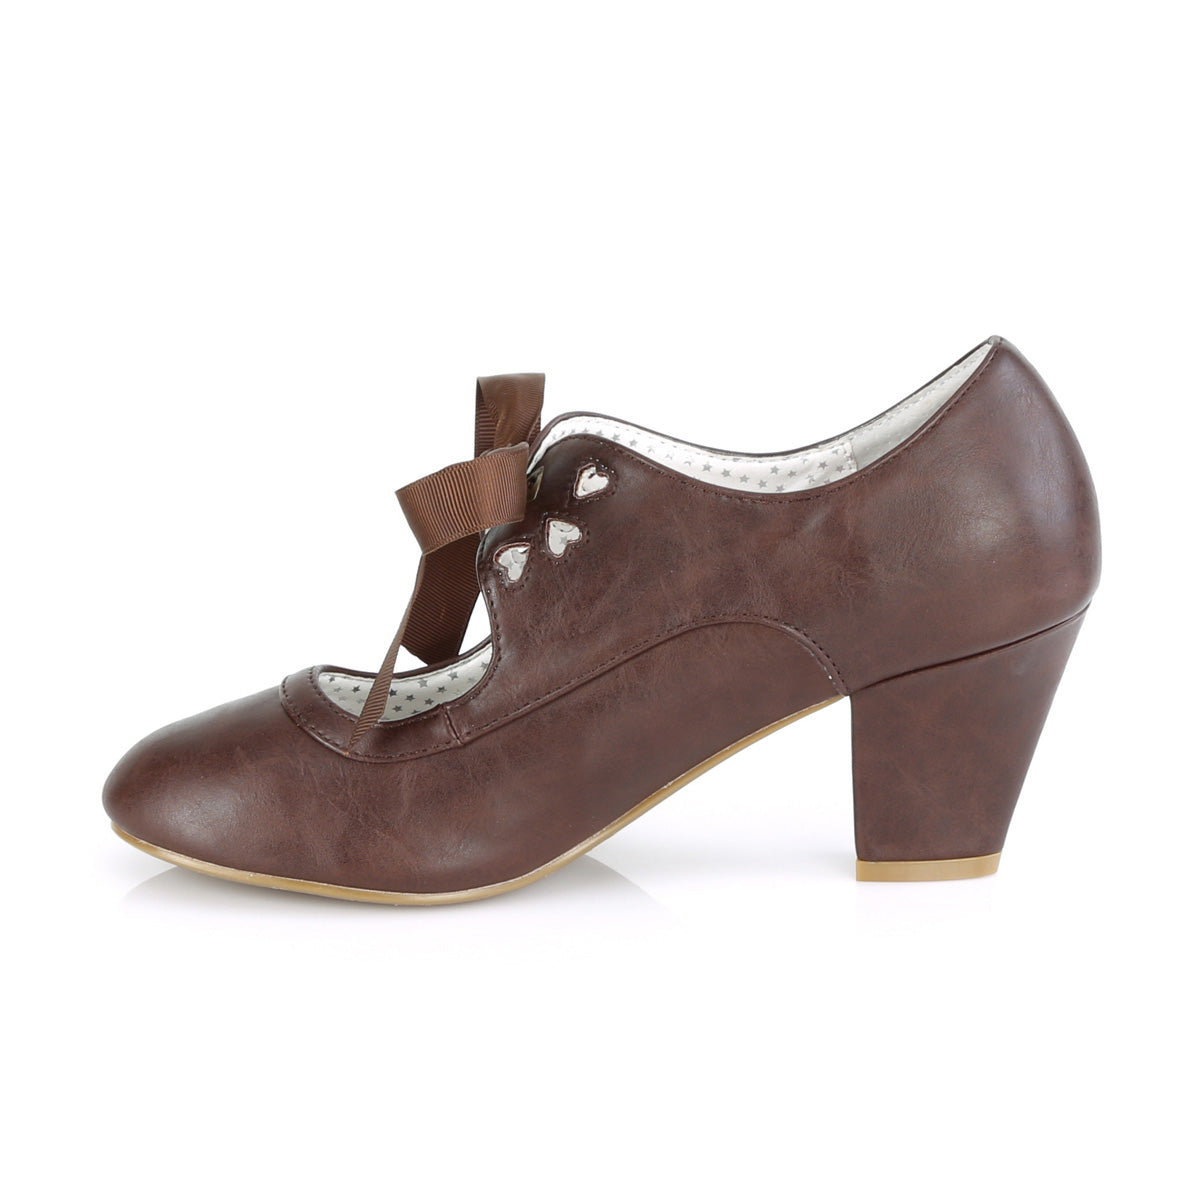 WIGGLE-32 Pin Up Couture Dark Brown Faux Leather Single Soles [Retro Glamour Shoes]